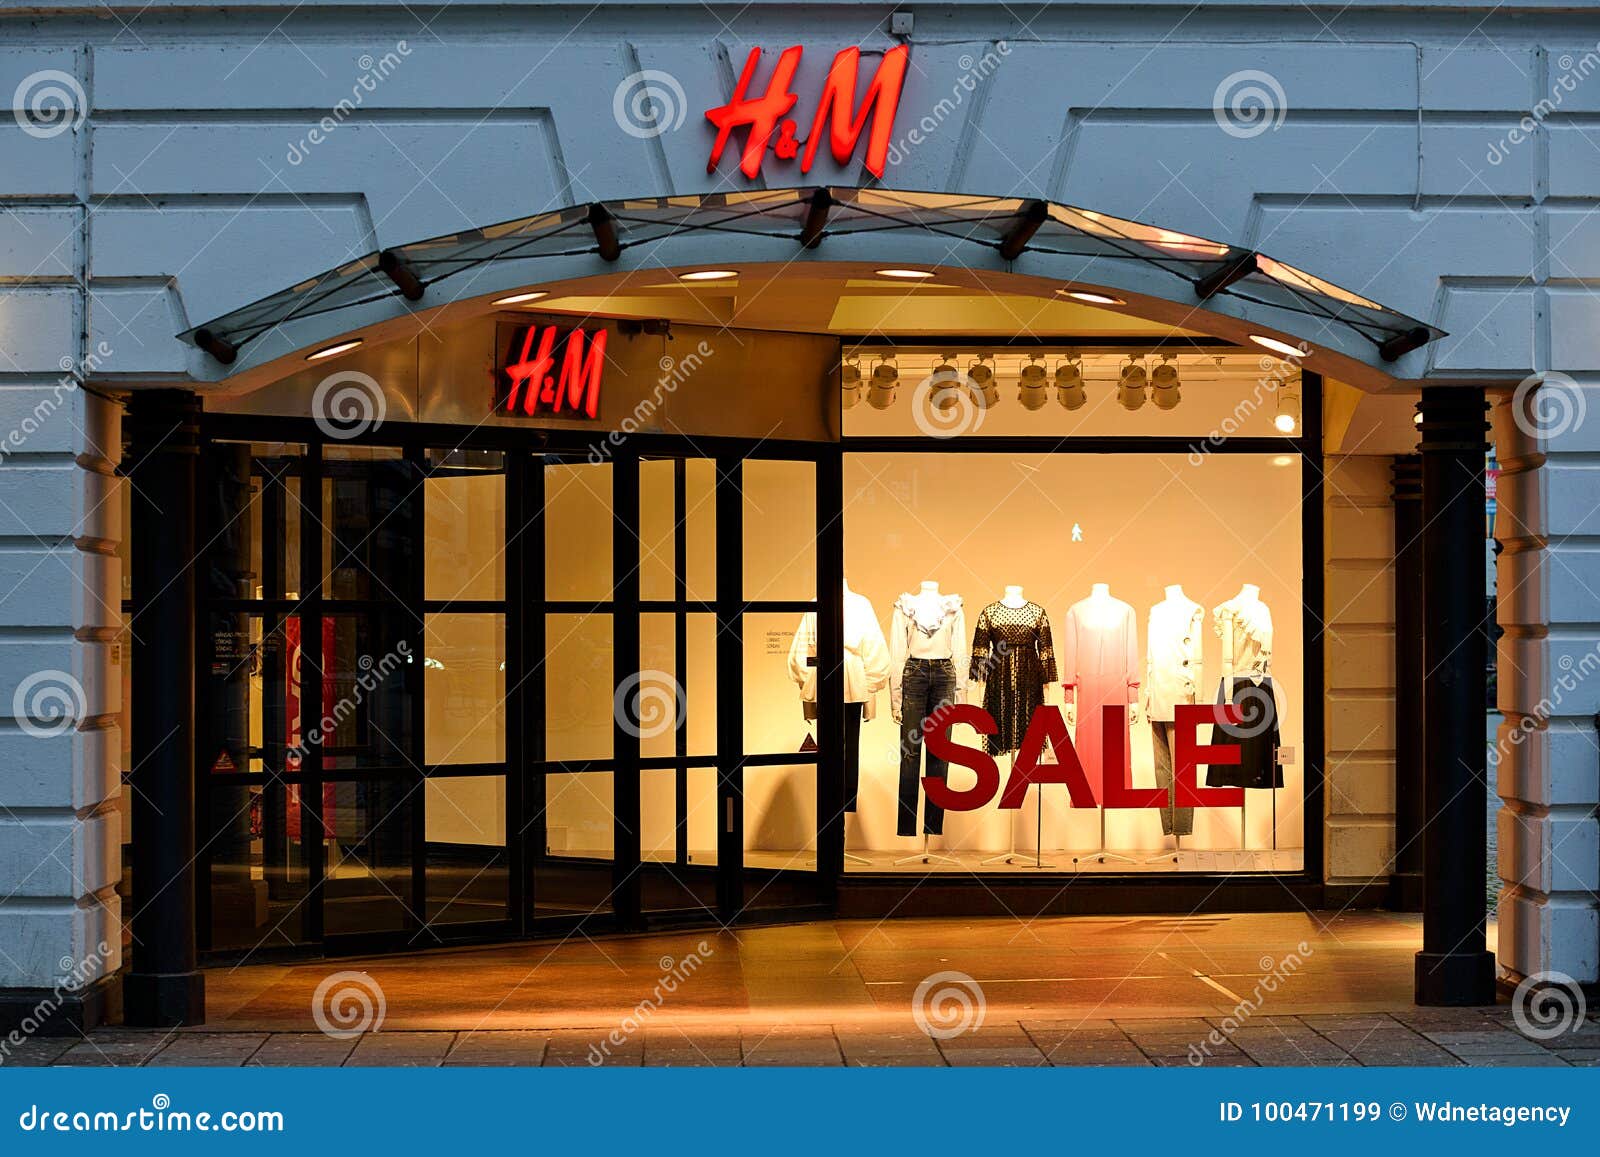 Exterior View Of The H M Store Editorial Stock Image Image Of Boutique Europe